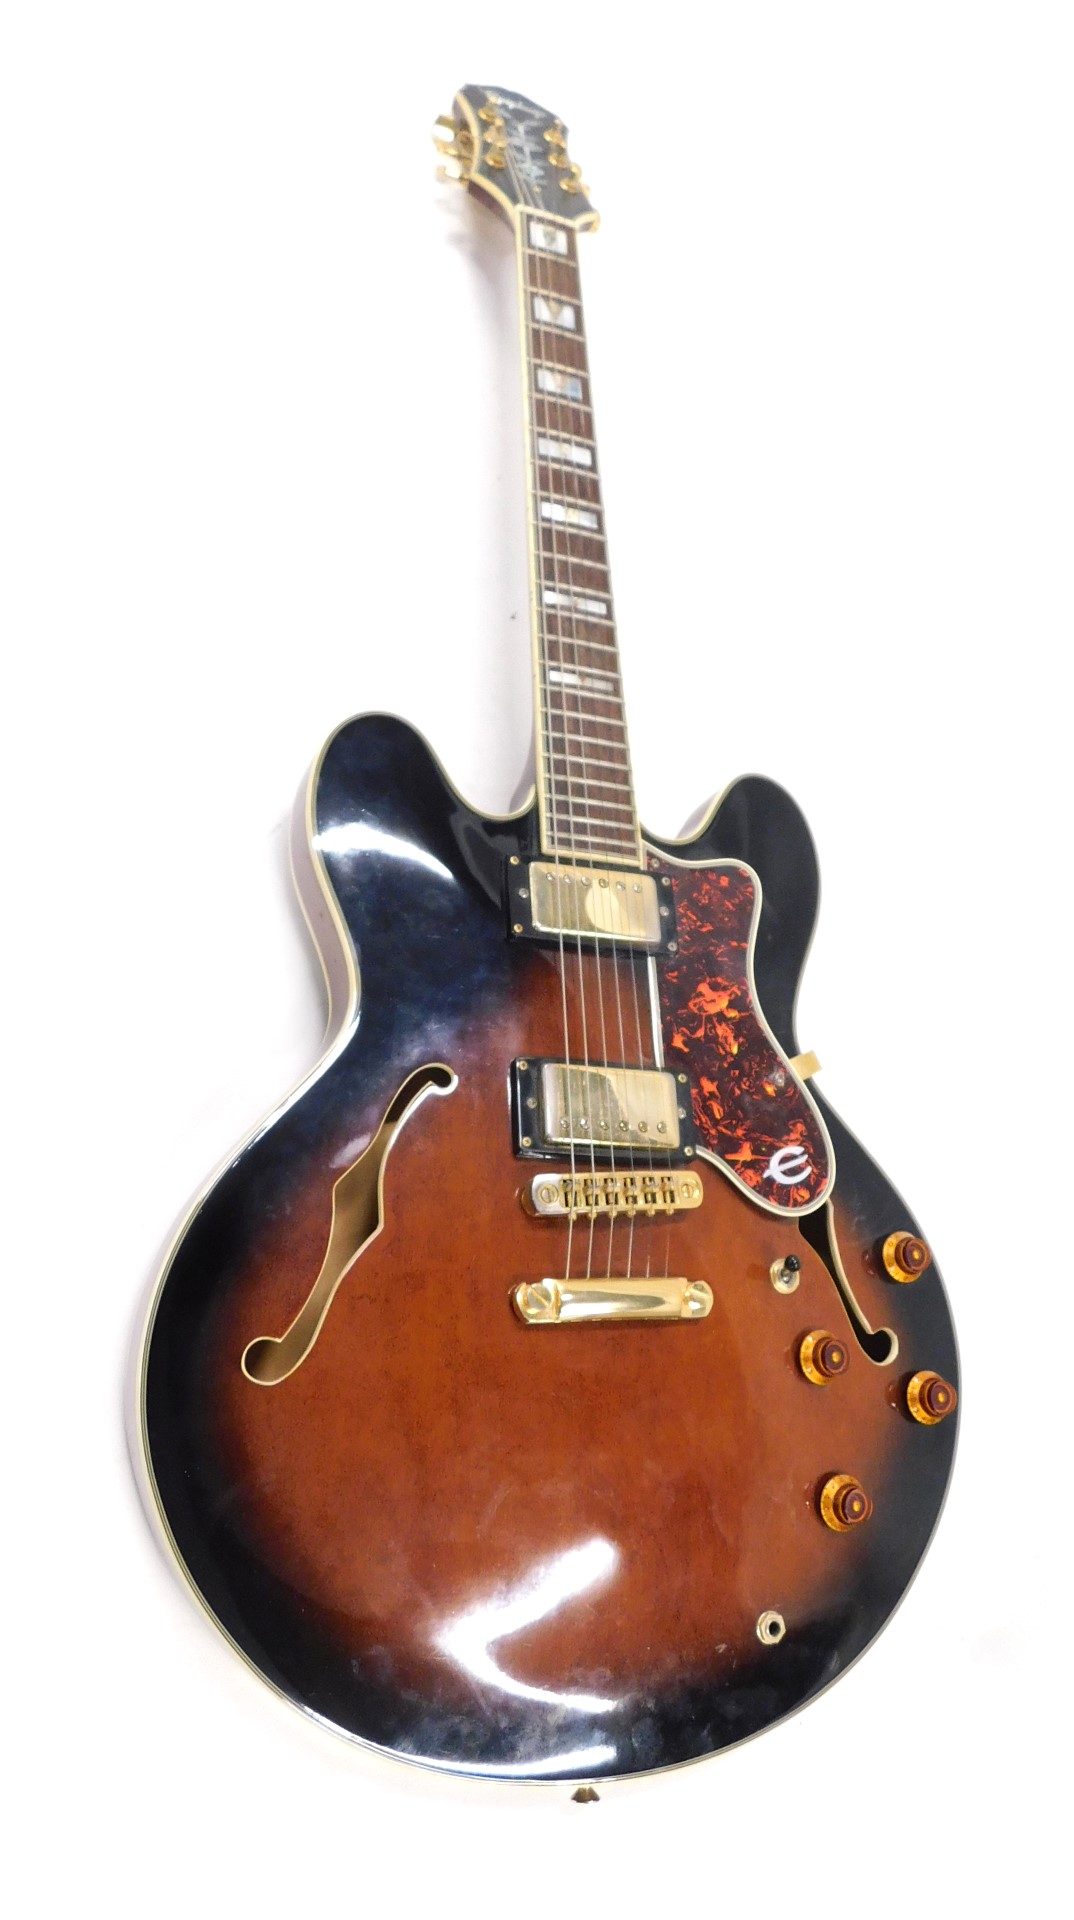 An Epiphone ES-335 electric guitar, with mother of pearl fret inlays, with padded travel case.